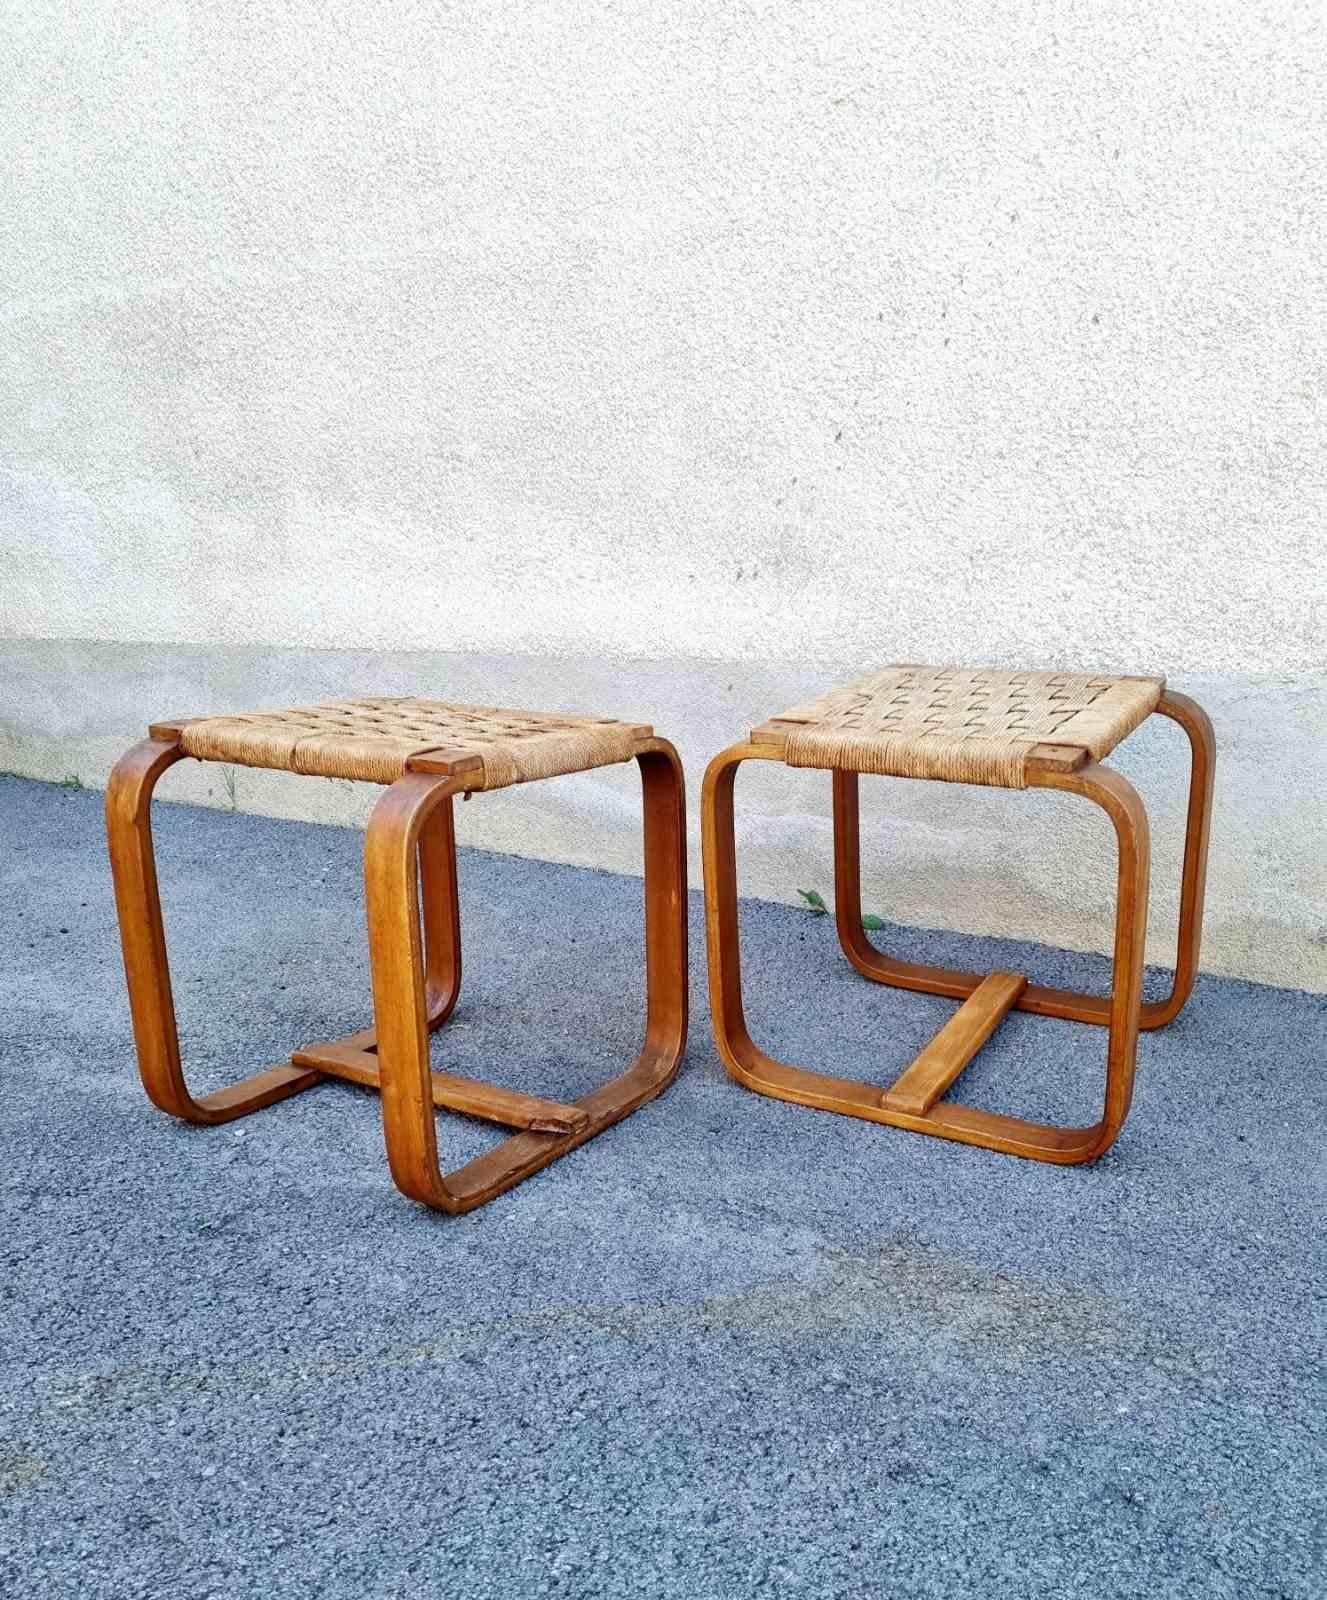 Rope Rare Pair of Stools by Giuseppe Pagano Pogatschnig for Gino Maggioni, Italy 40s For Sale